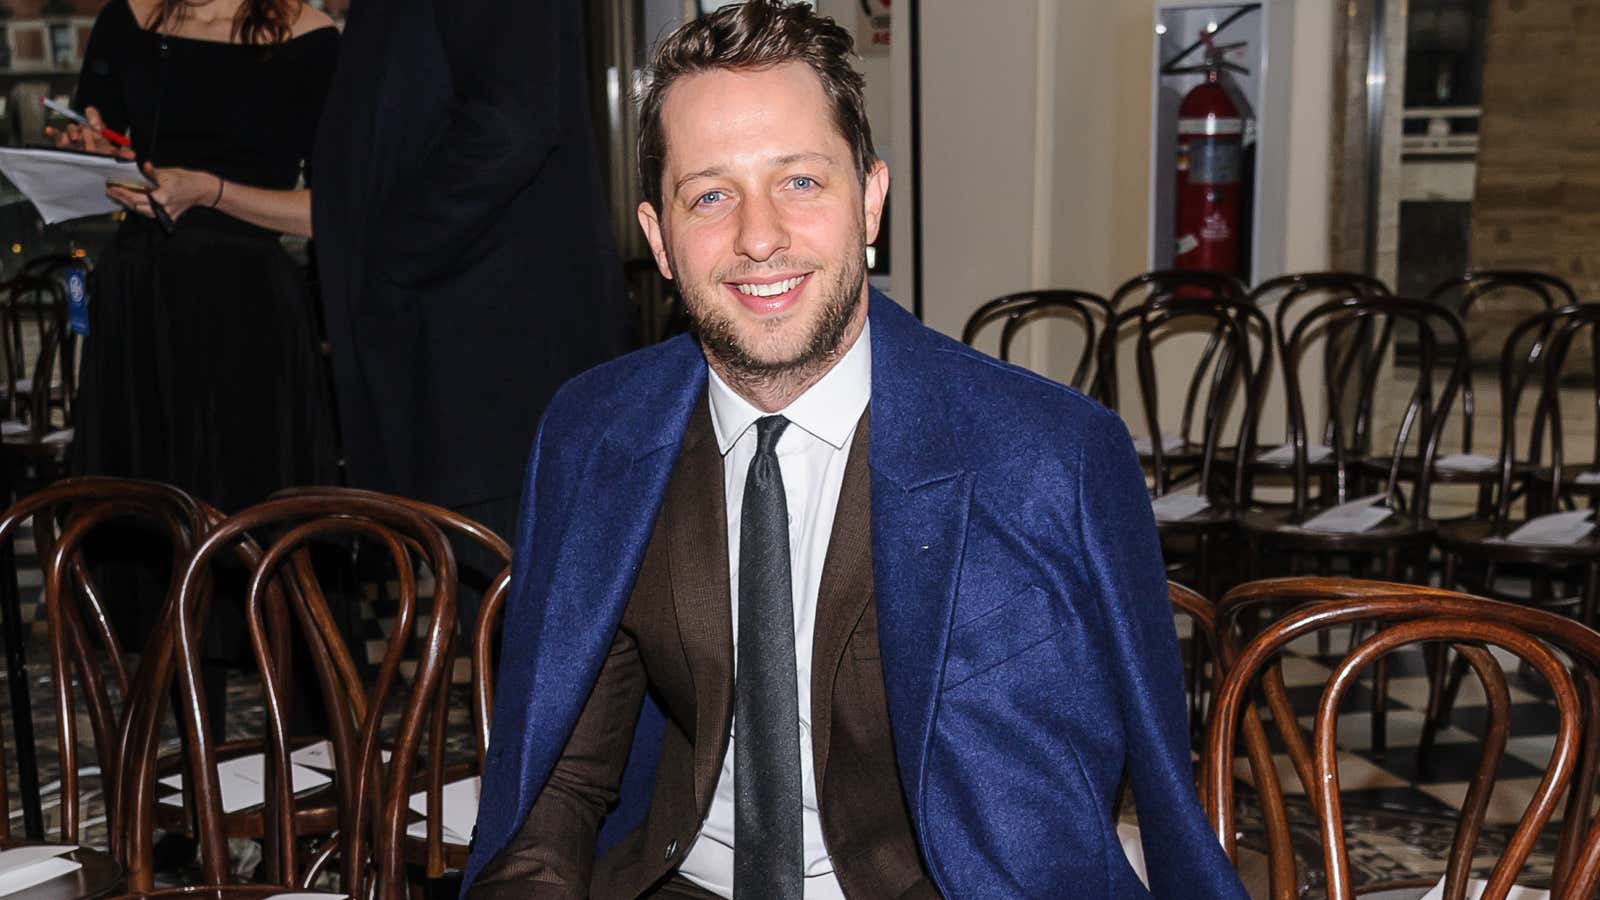 Derek Blasberg attends the Tory Burch fashion show in David Geffen Hall at New York Fashion Week Fall/Winter 2016 on Tuesday, Feb. 16, 2016, in New York. (Photo by Christopher Smith/Invision/AP)